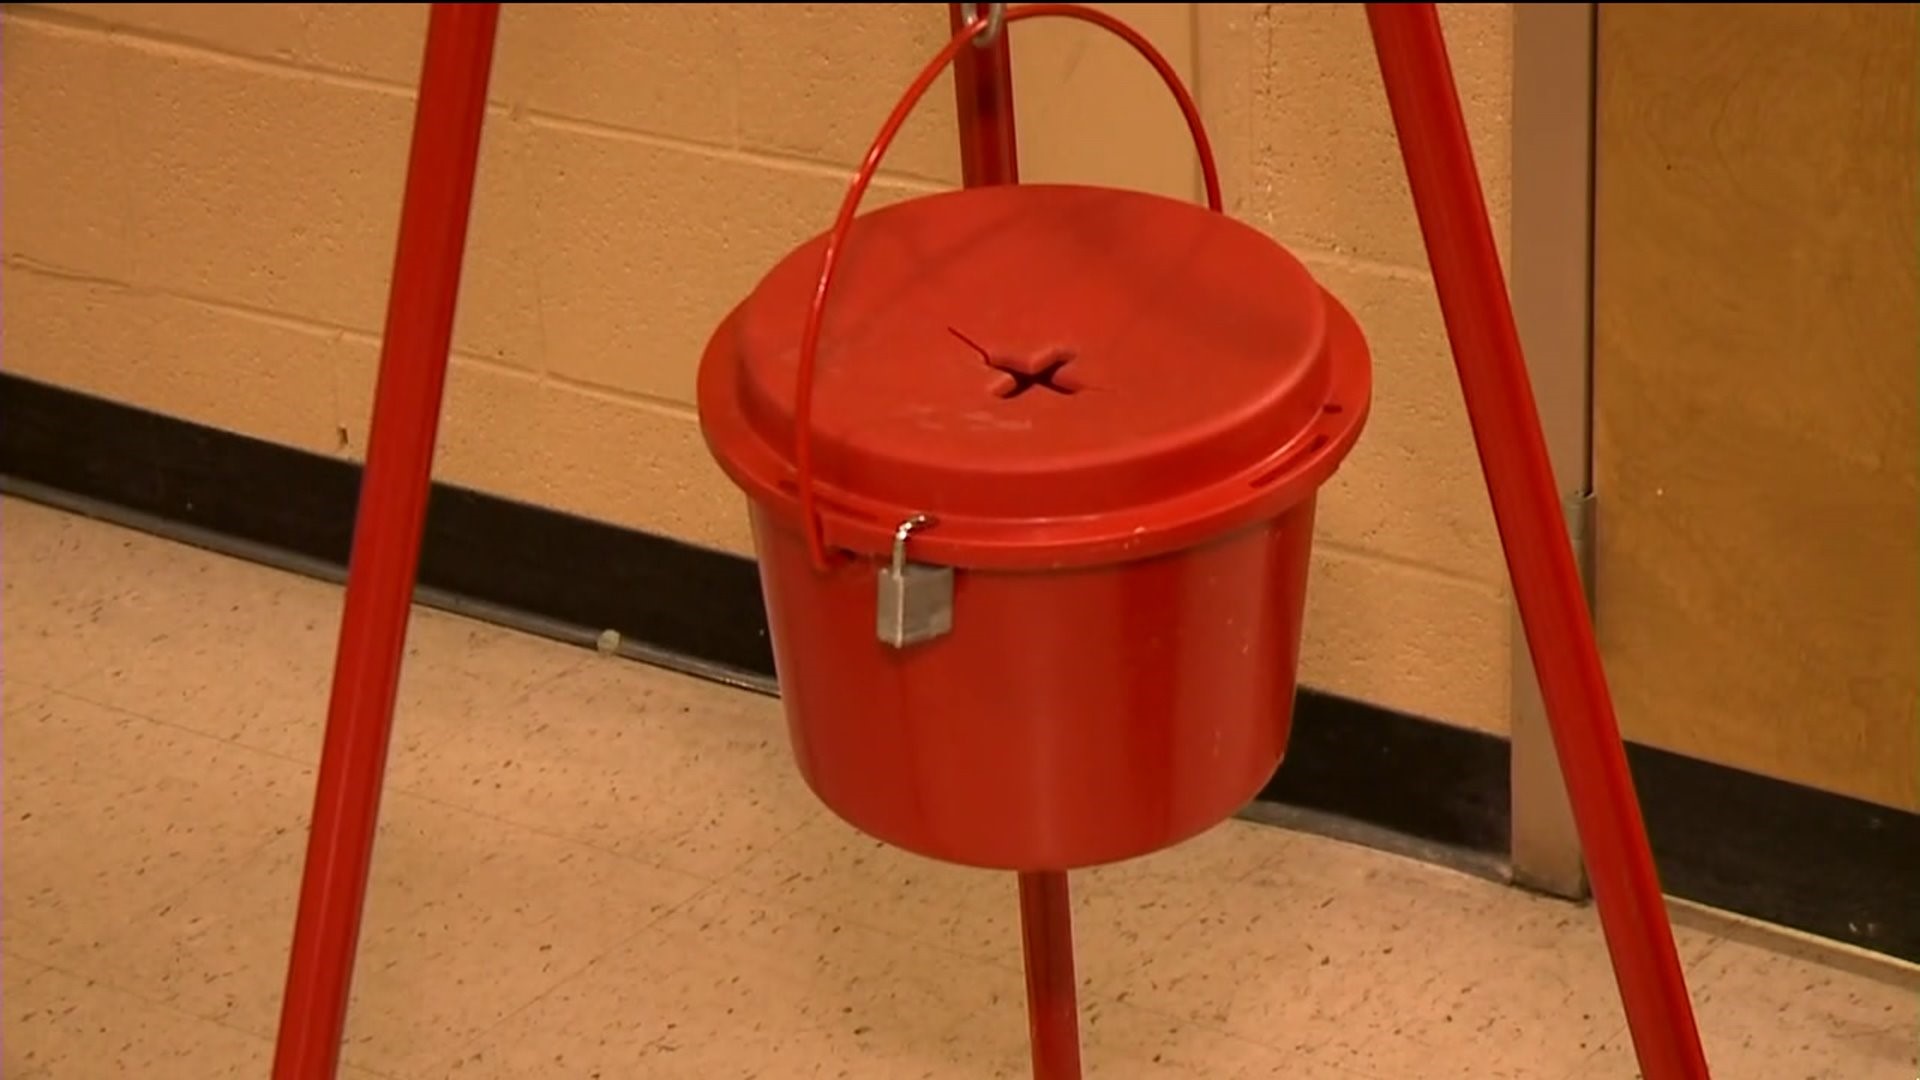 Salvation Army Organizers Planning Ahead for Kettle Campaign in the Poconos